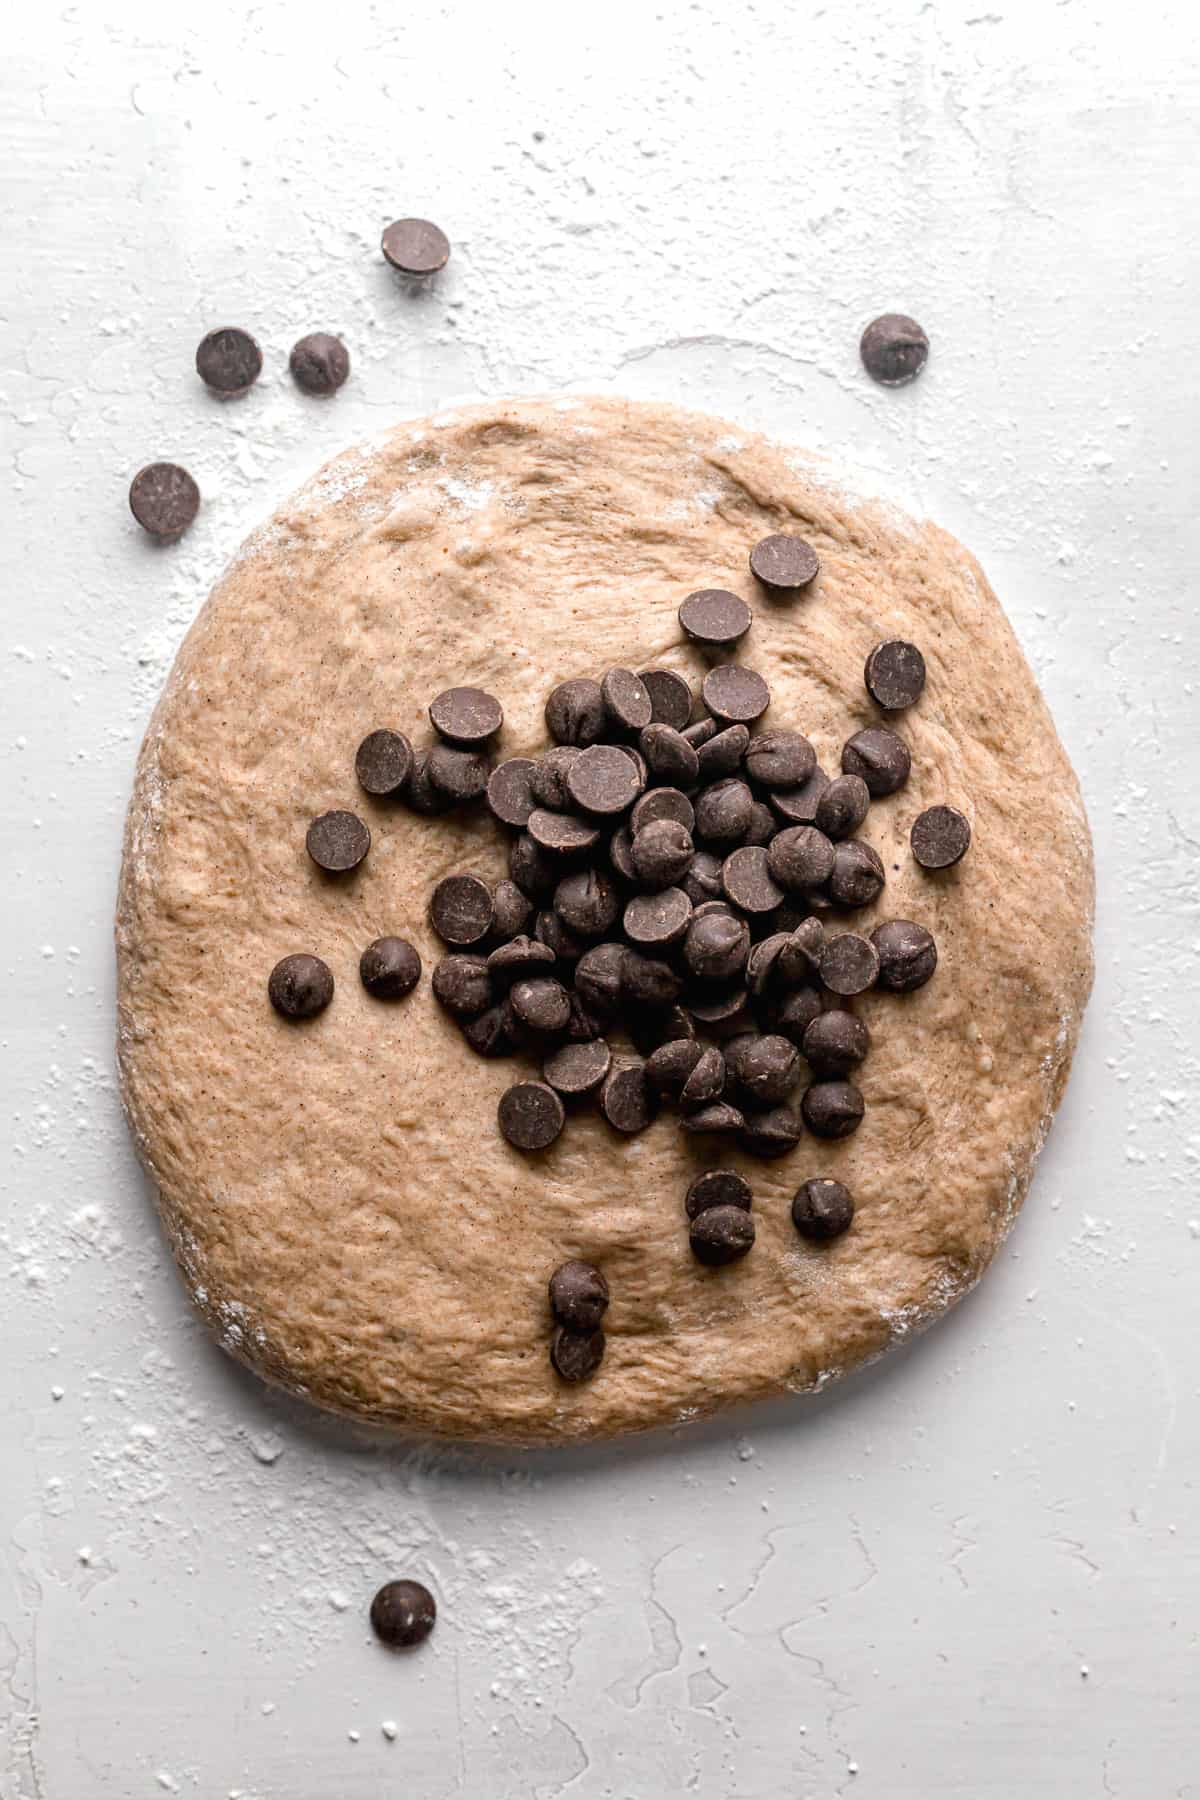 dough spread out with chocolate chips in the center.